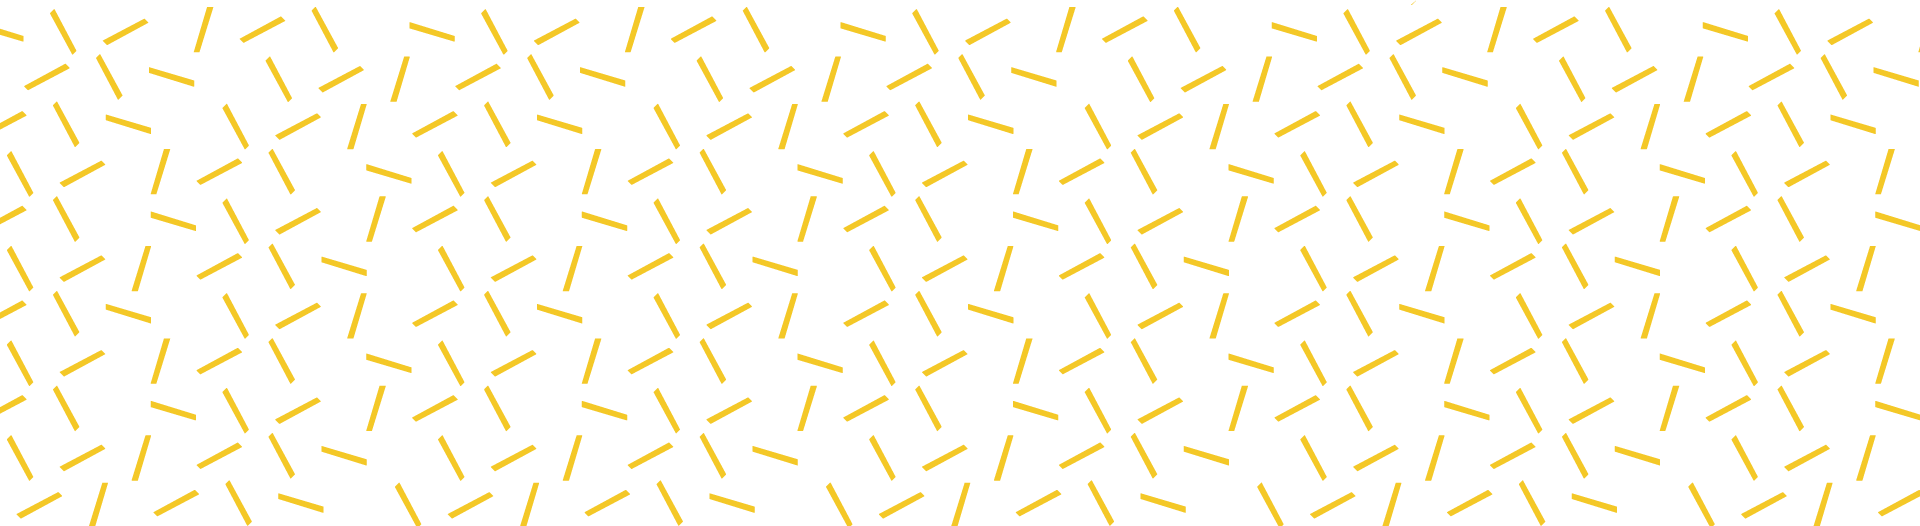 Illustration of the brand’s pattern. It consists of short lines rotated and sprinkled in space.